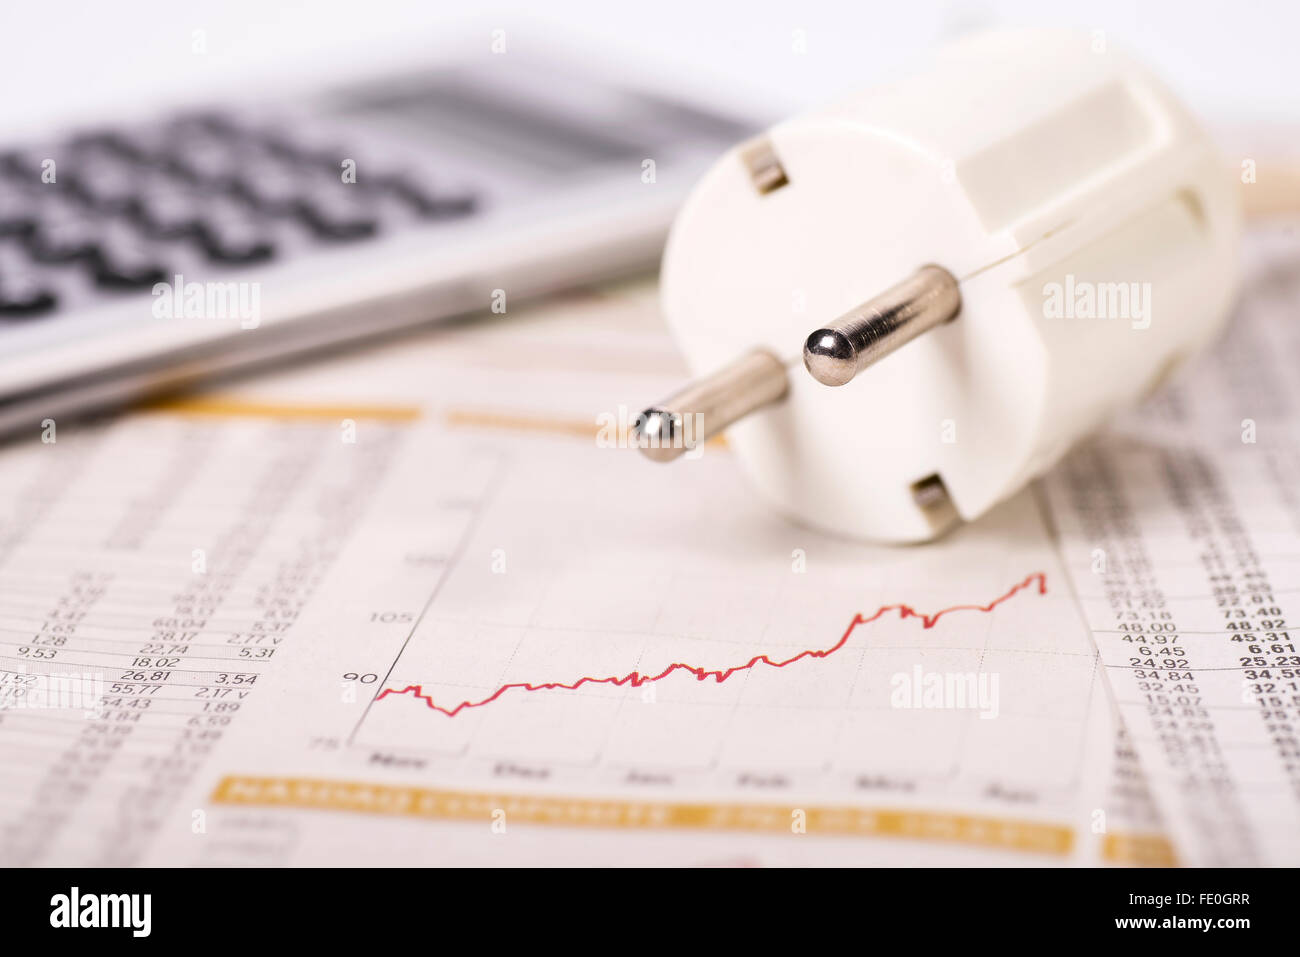 Plug and graphic with increasing curve symbolizing high electricity costs. Stock Photo